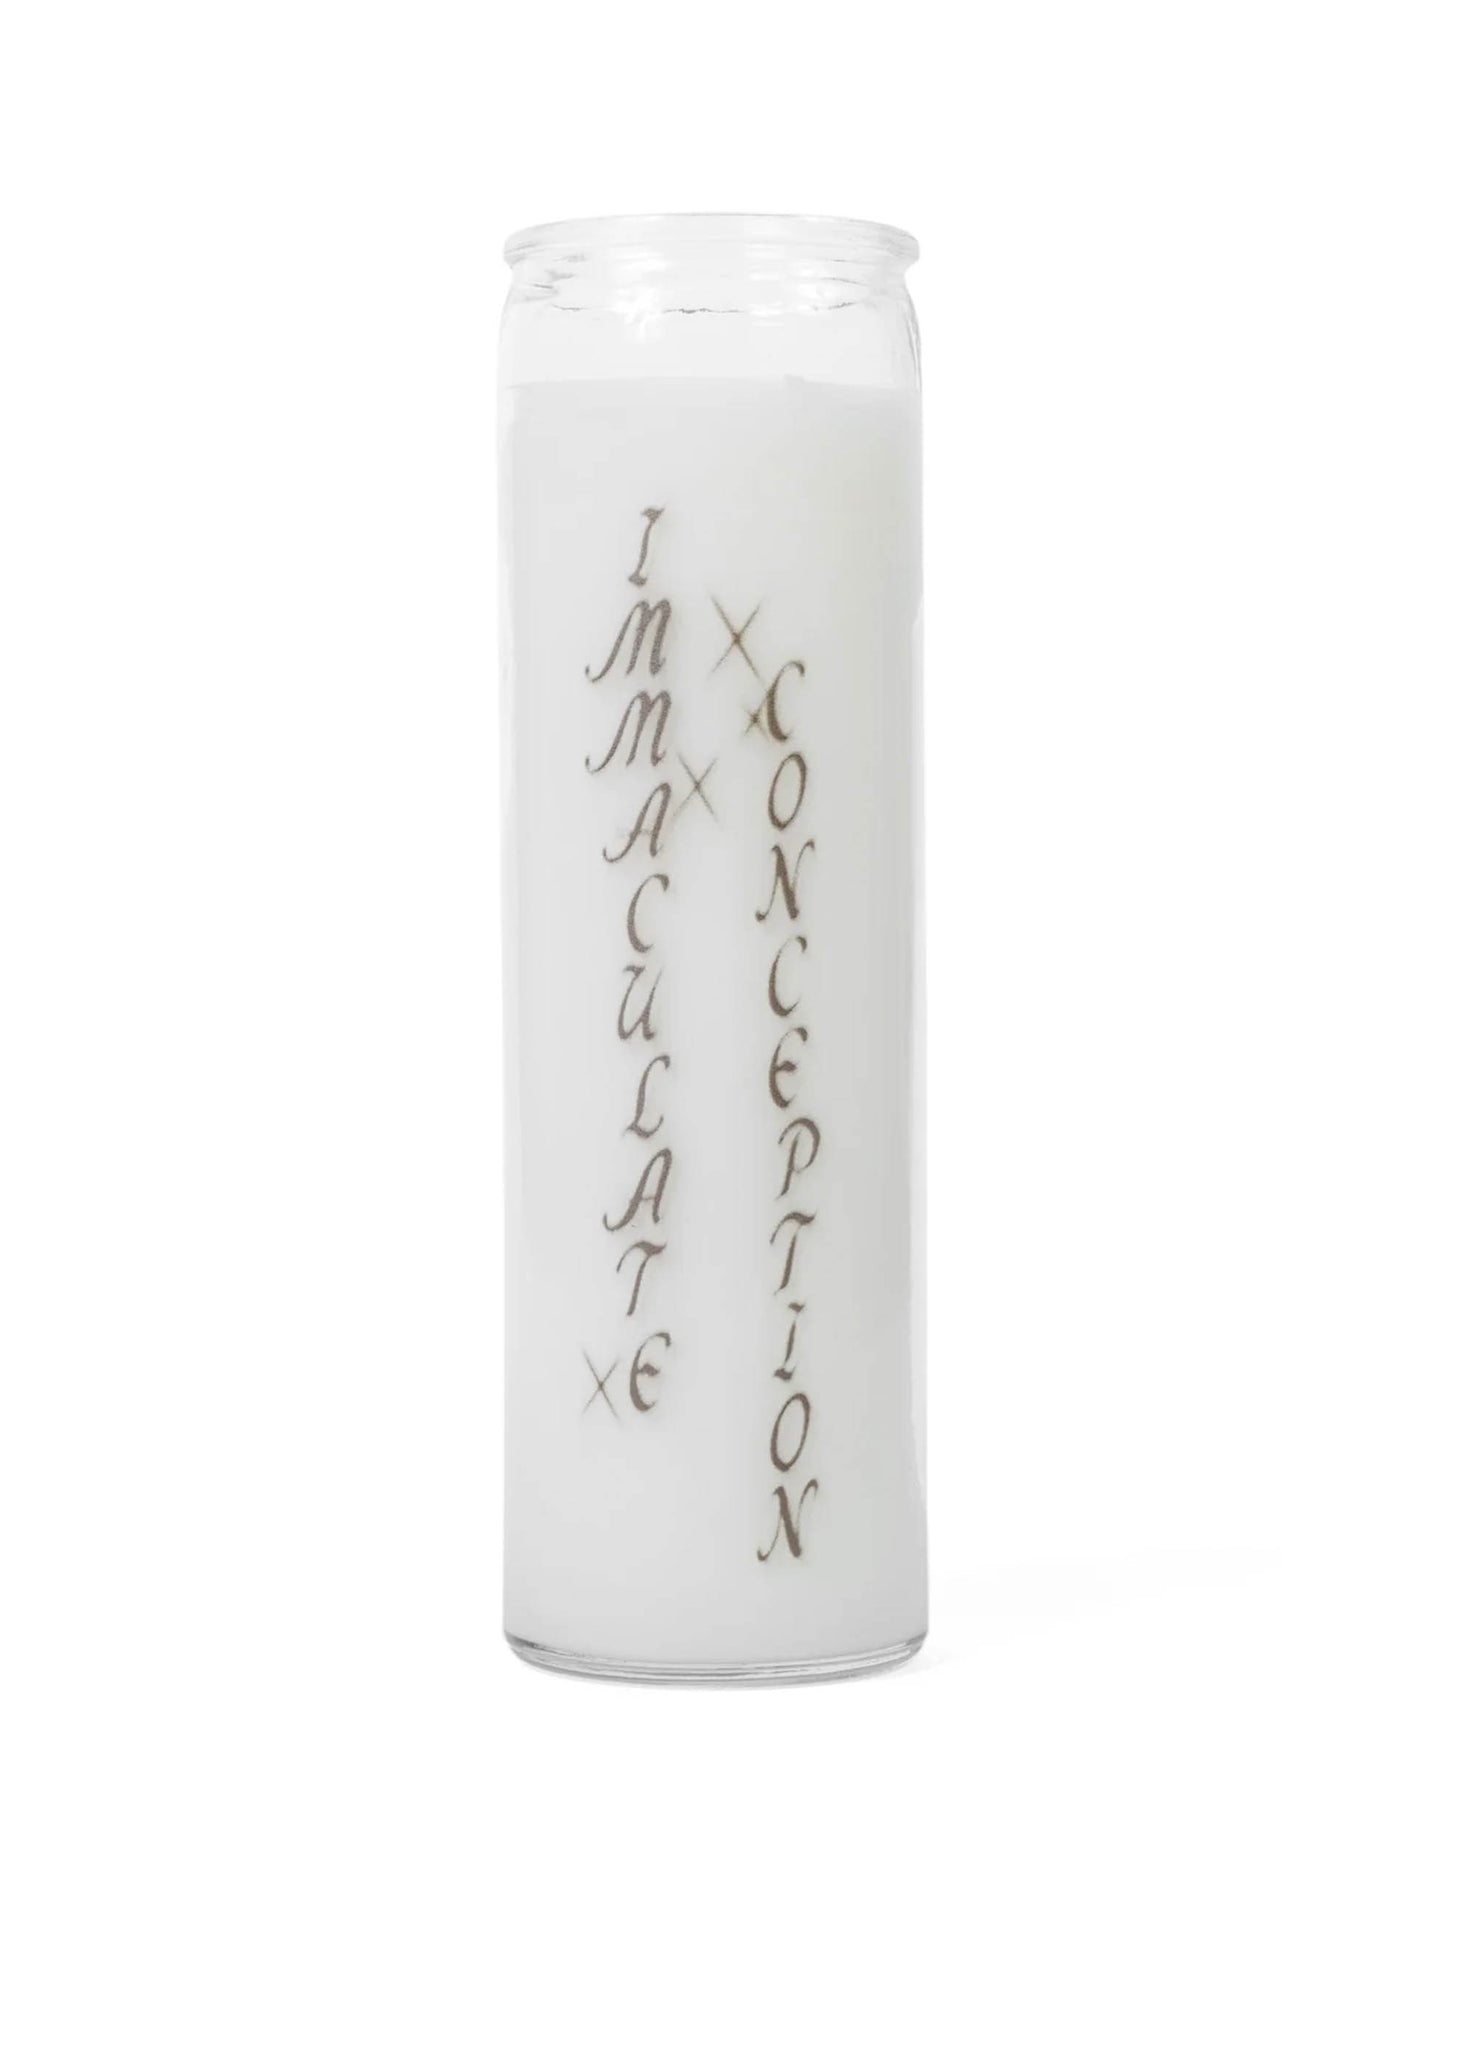 Market Immaculate Conception Candle